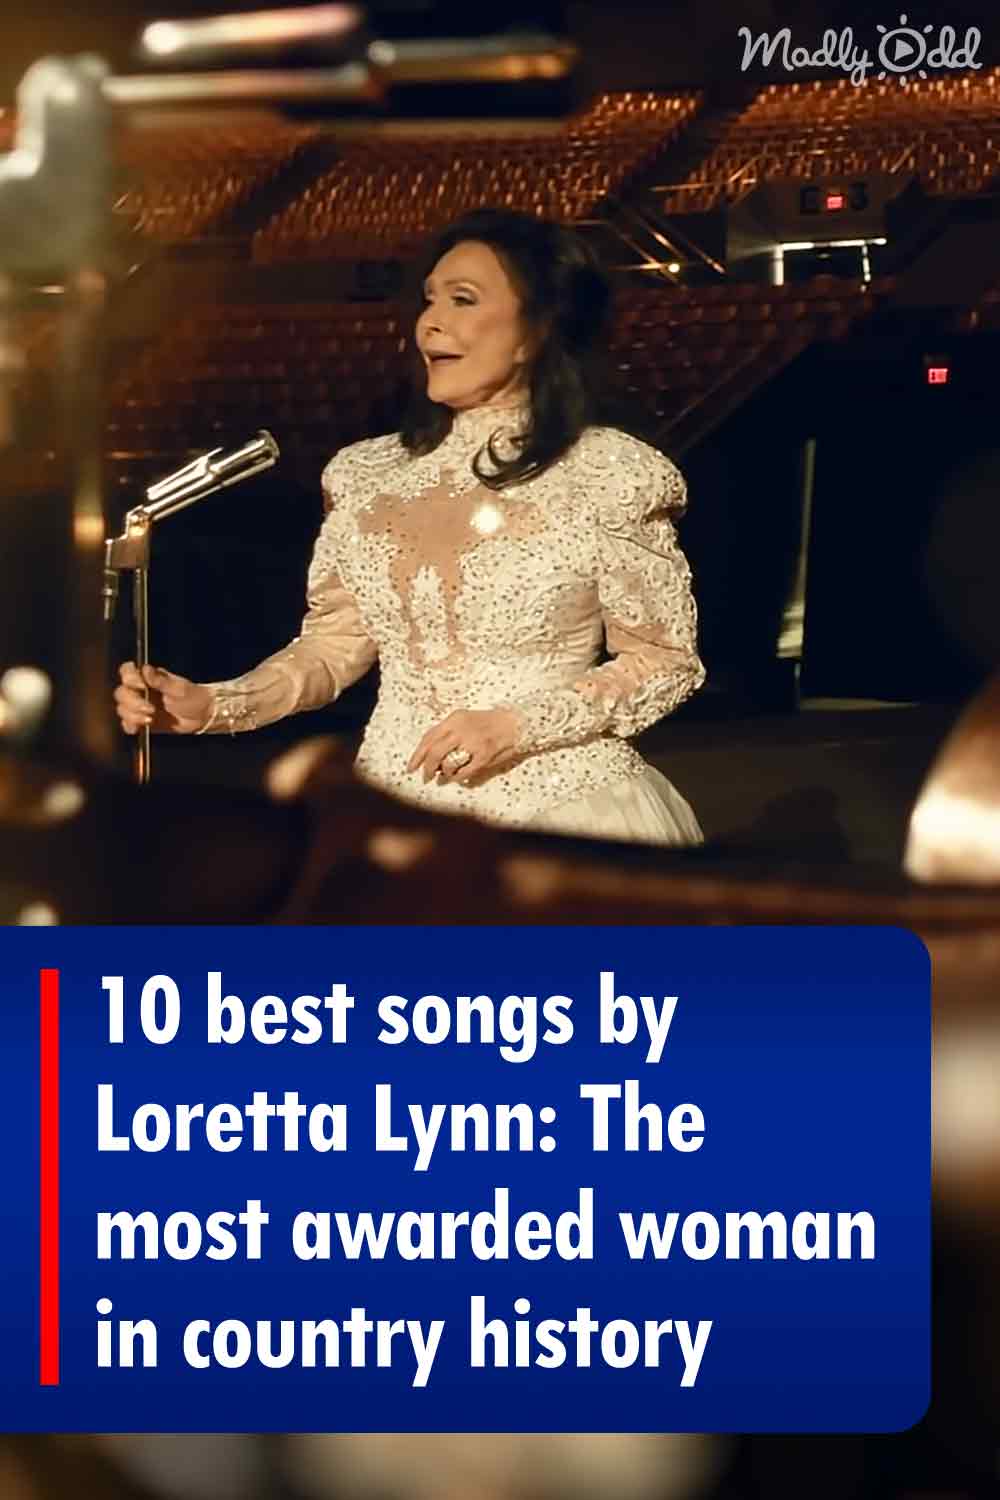 10 best songs by Loretta Lynn: The most awarded woman in country history